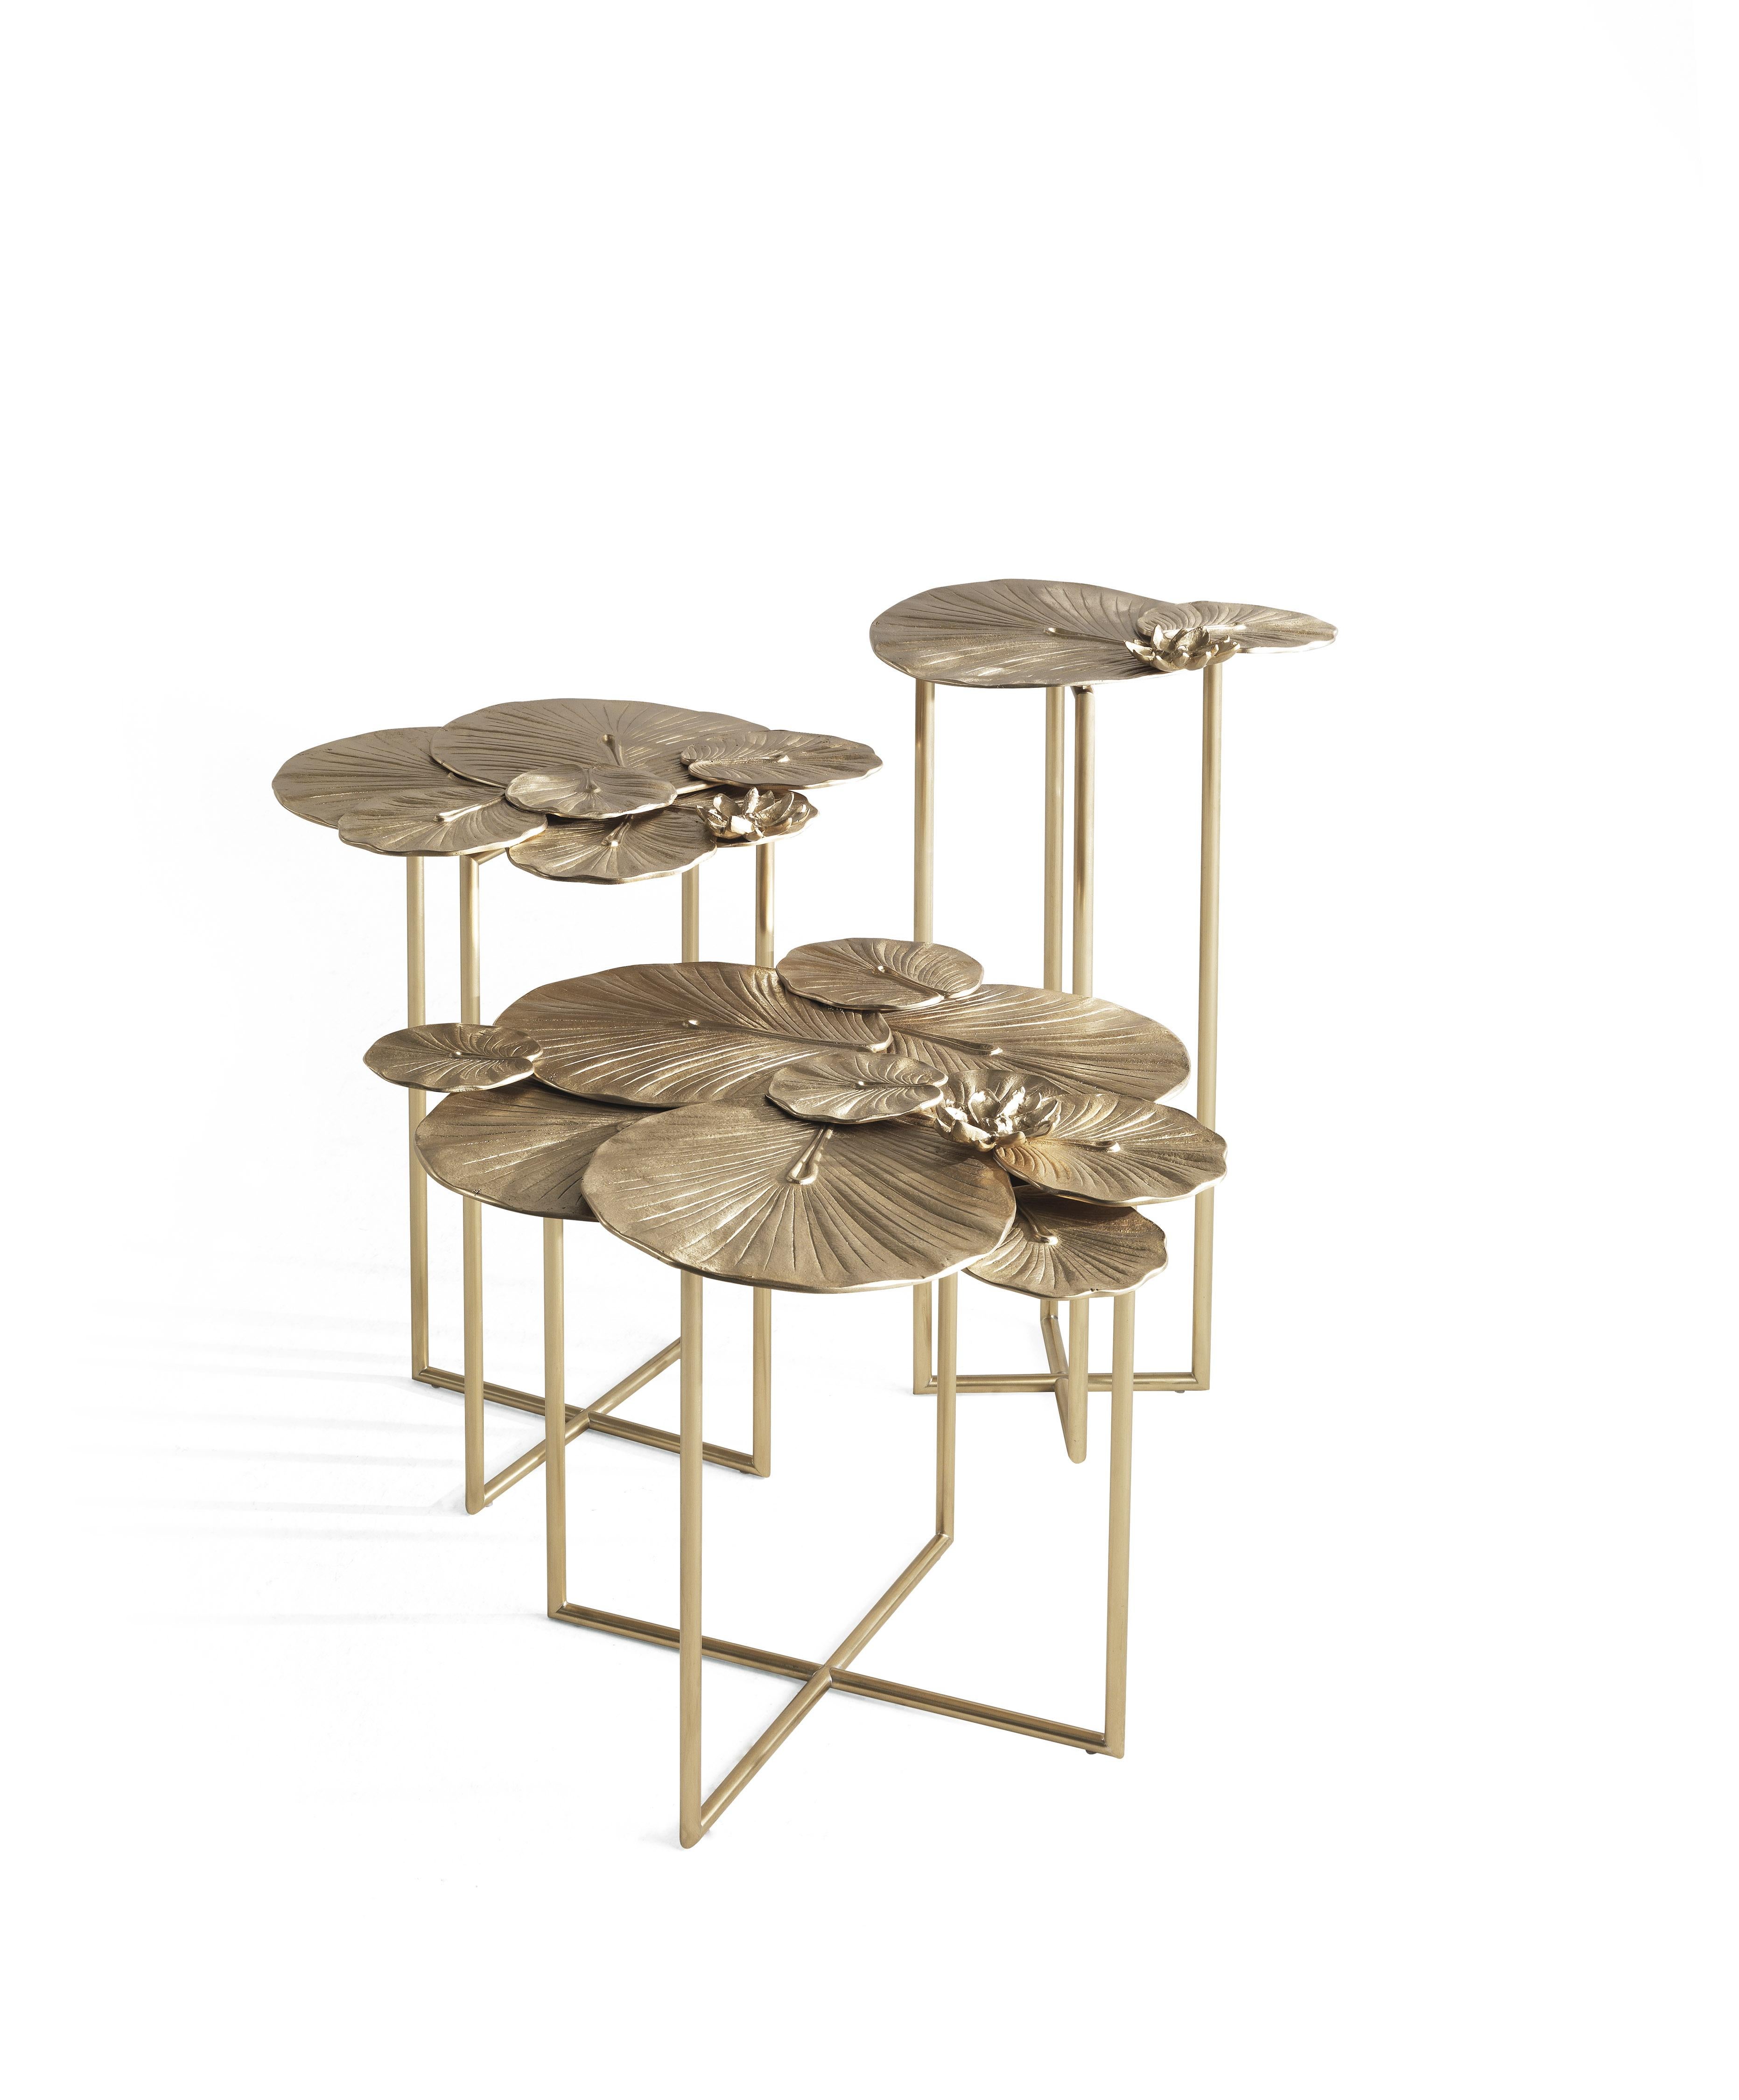 Italian 21st Century Monet Small Side Table in Hand-chiseled Cast Brass For Sale